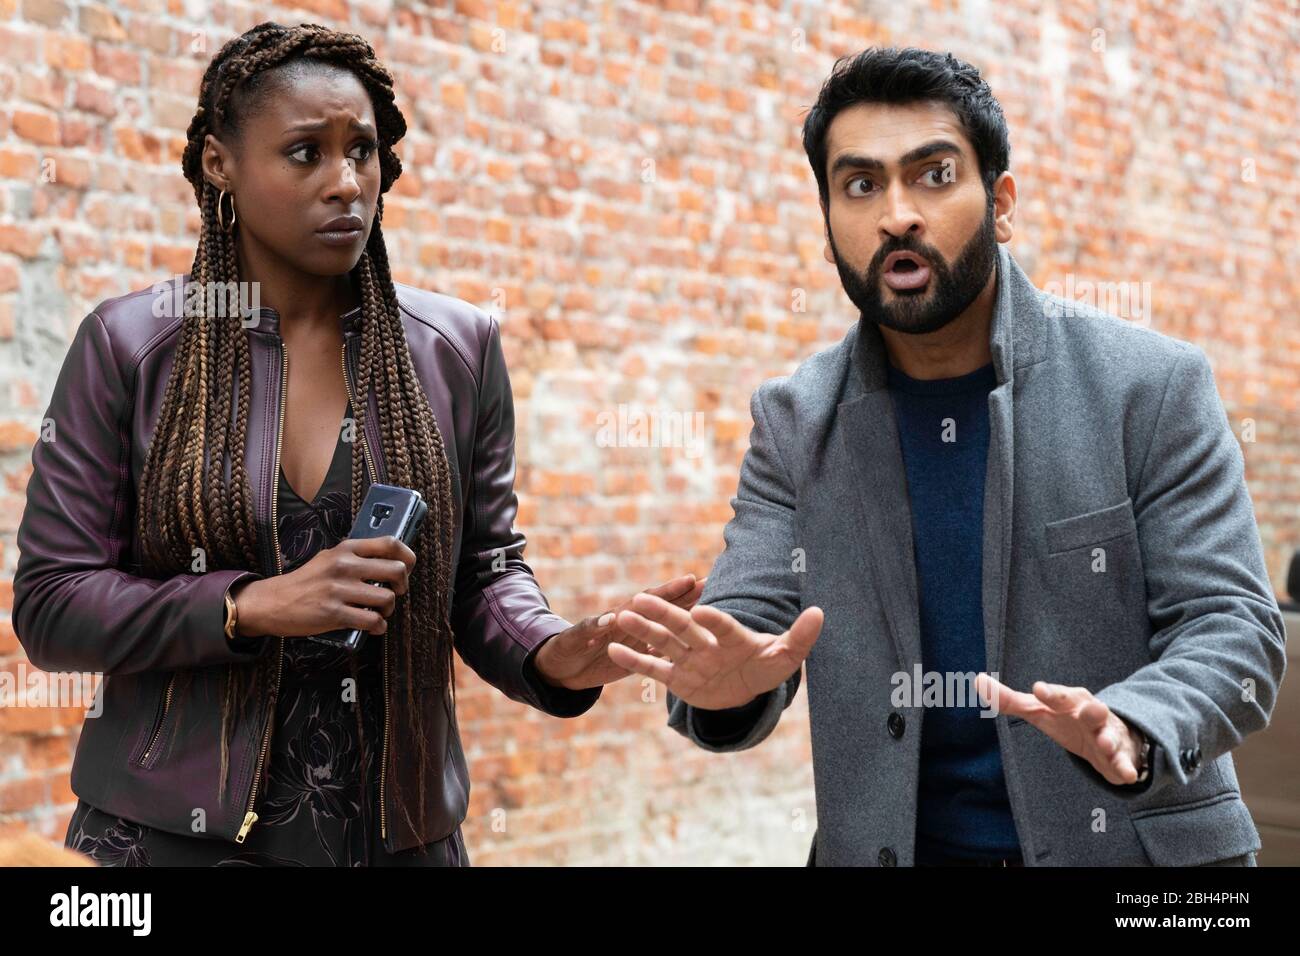 RELEASE DATE: May 22, 2020 TITLE: The Lovebirds STUDIO: 3 Arts Entertainment DIRECTOR: Michael Showalter PLOT: A couple (Issa Rae and Kumail Nanjiani) experiences a defining moment in their relationship when they are unintentionally embroiled in a murder mystery. STARRING: ISSA RAE as Leilani, KUMAIL NANJIANA as Jibran. (Credit Image: © 3 Arts Entertainment/Entertainment Pictures) Stock Photo